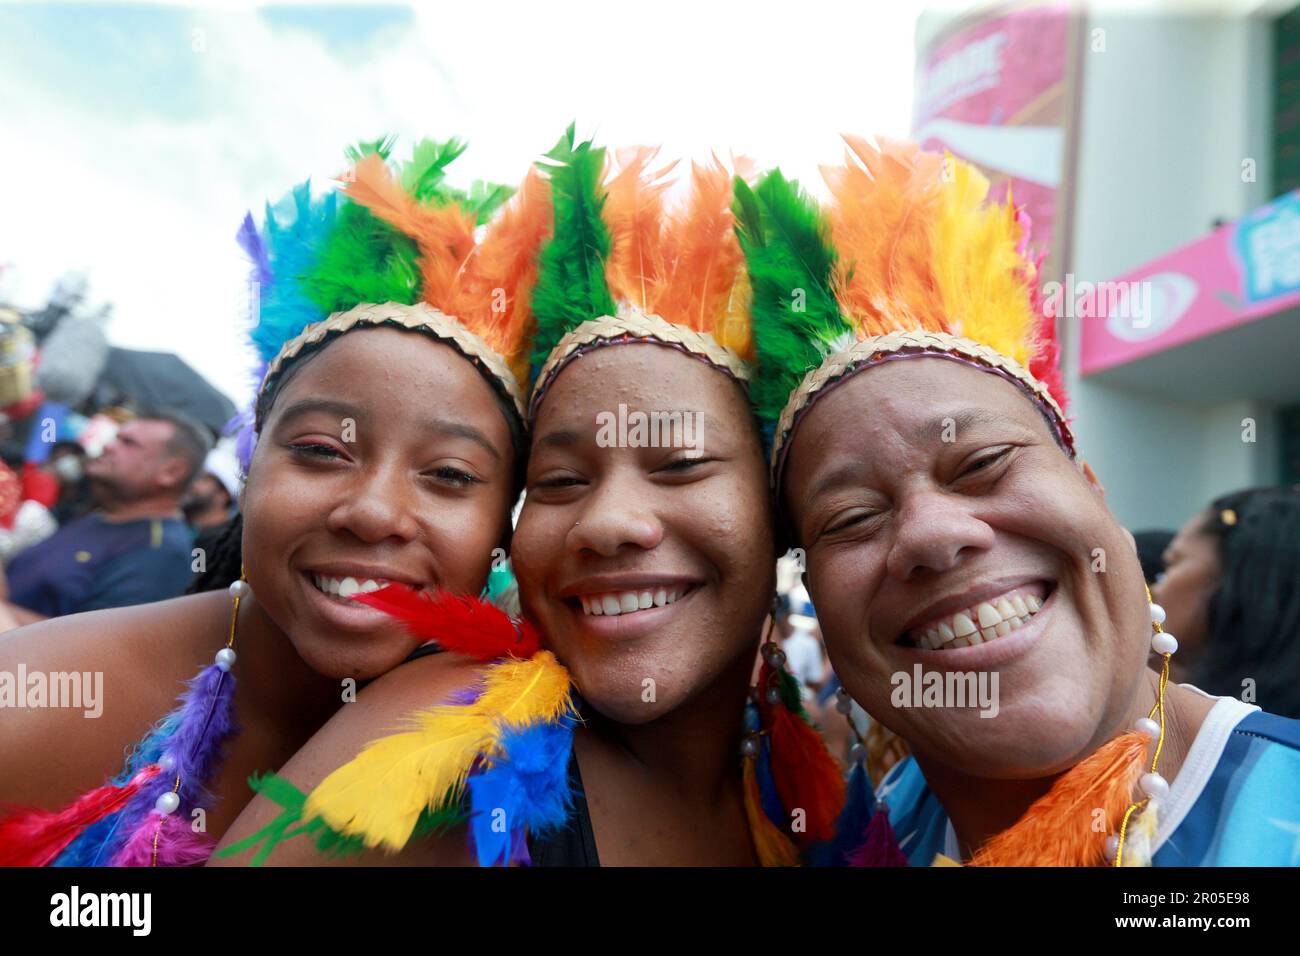 salvador, bahia, brazil - february 22, 2023: revelers have fun during canaval in the city of Salvador. Stock Photo